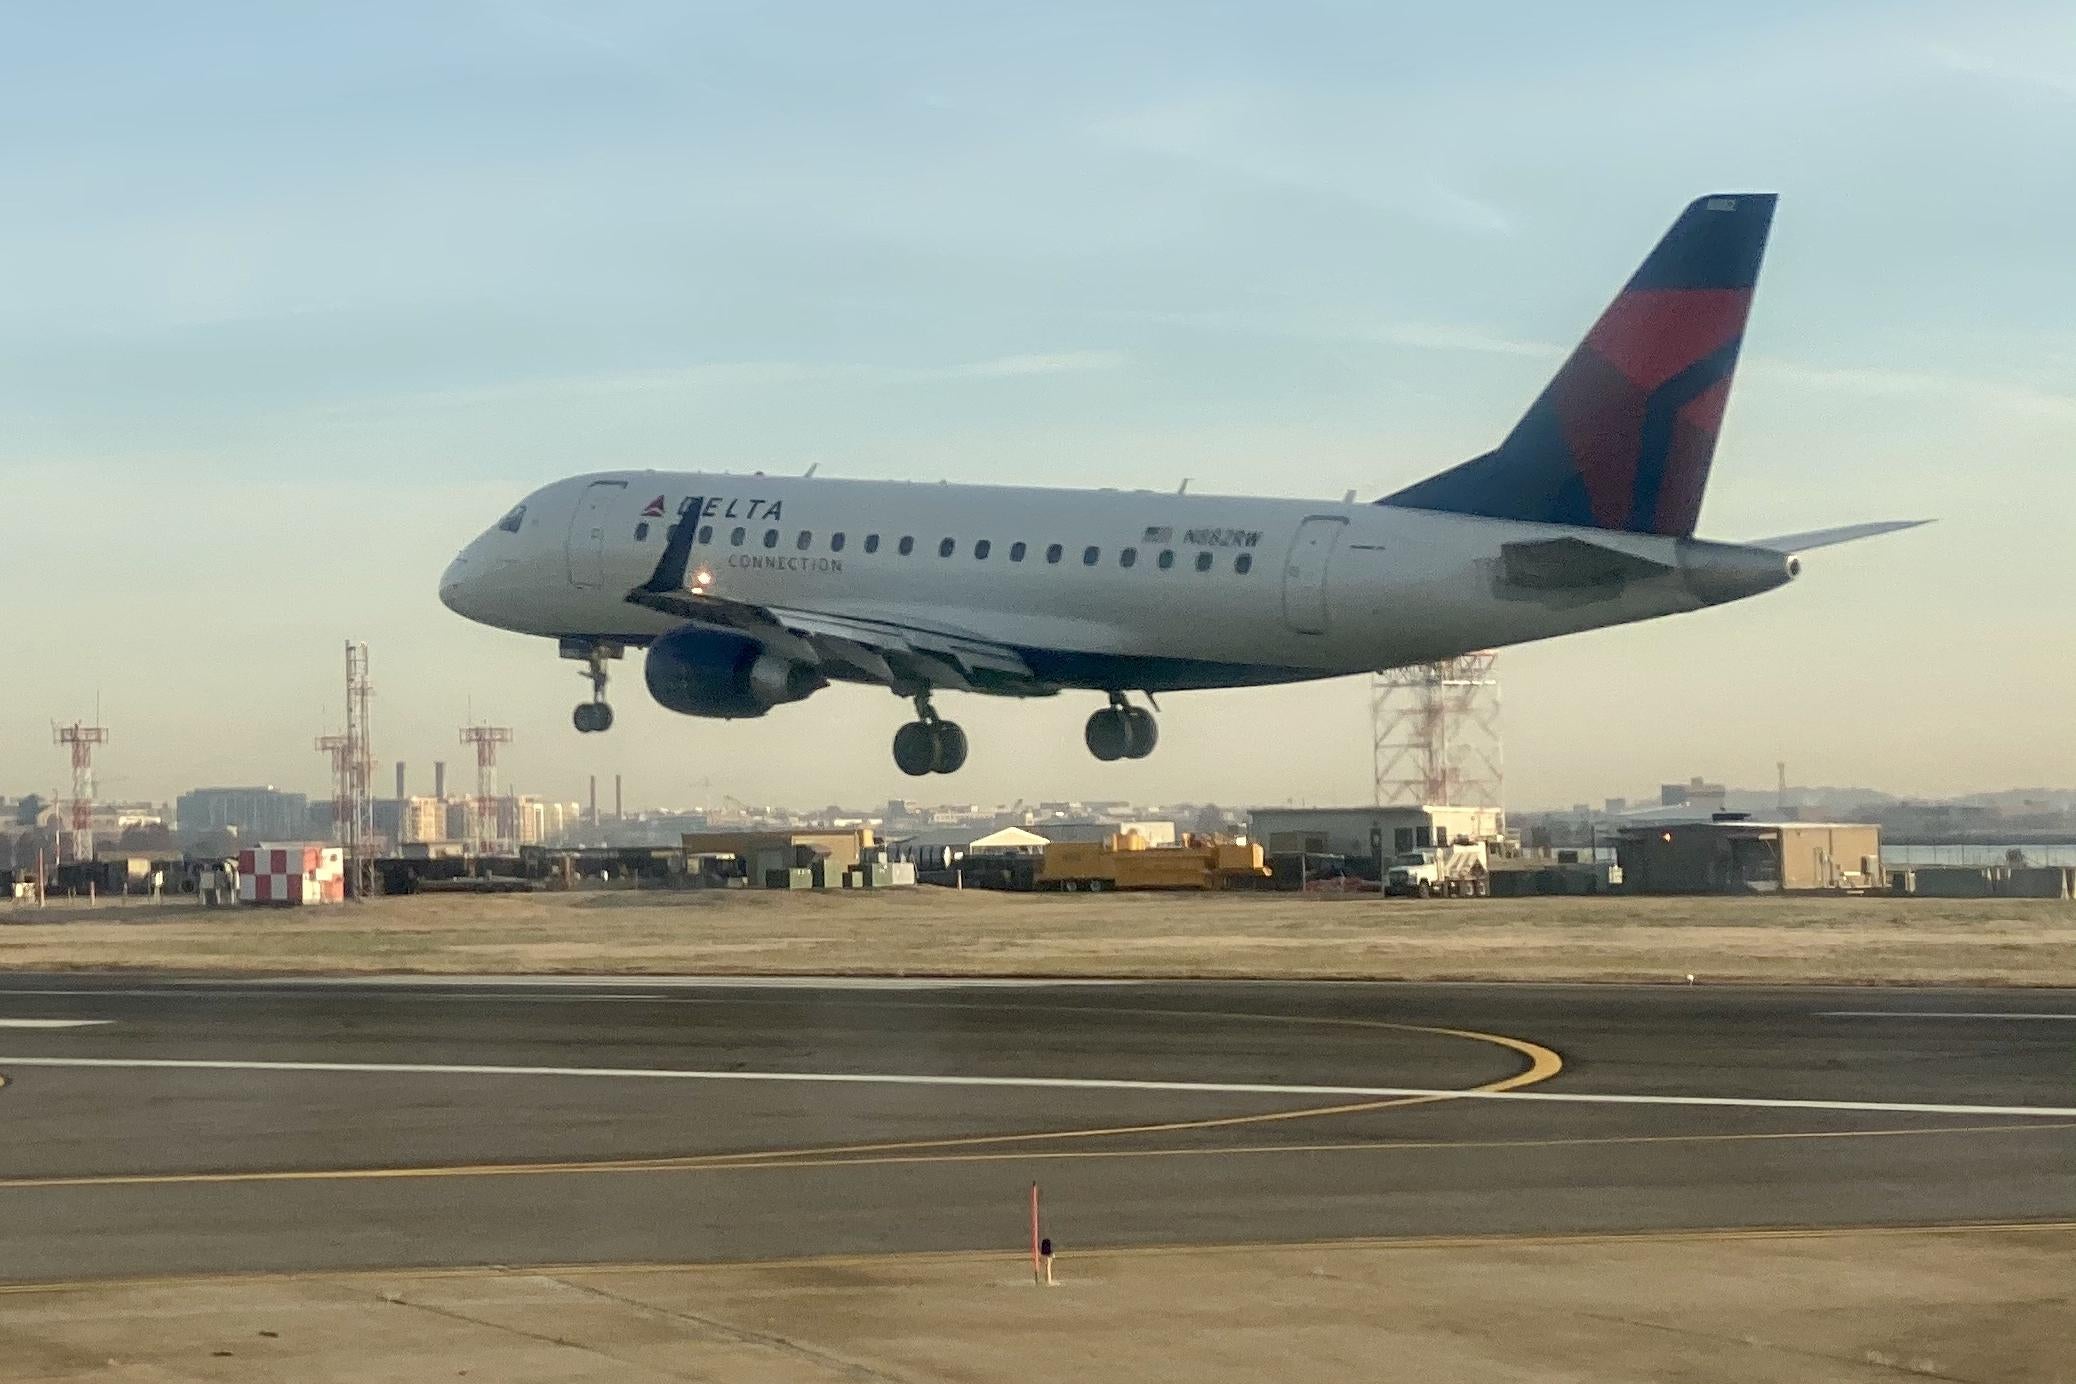 A Delta airplane lands at an airport.